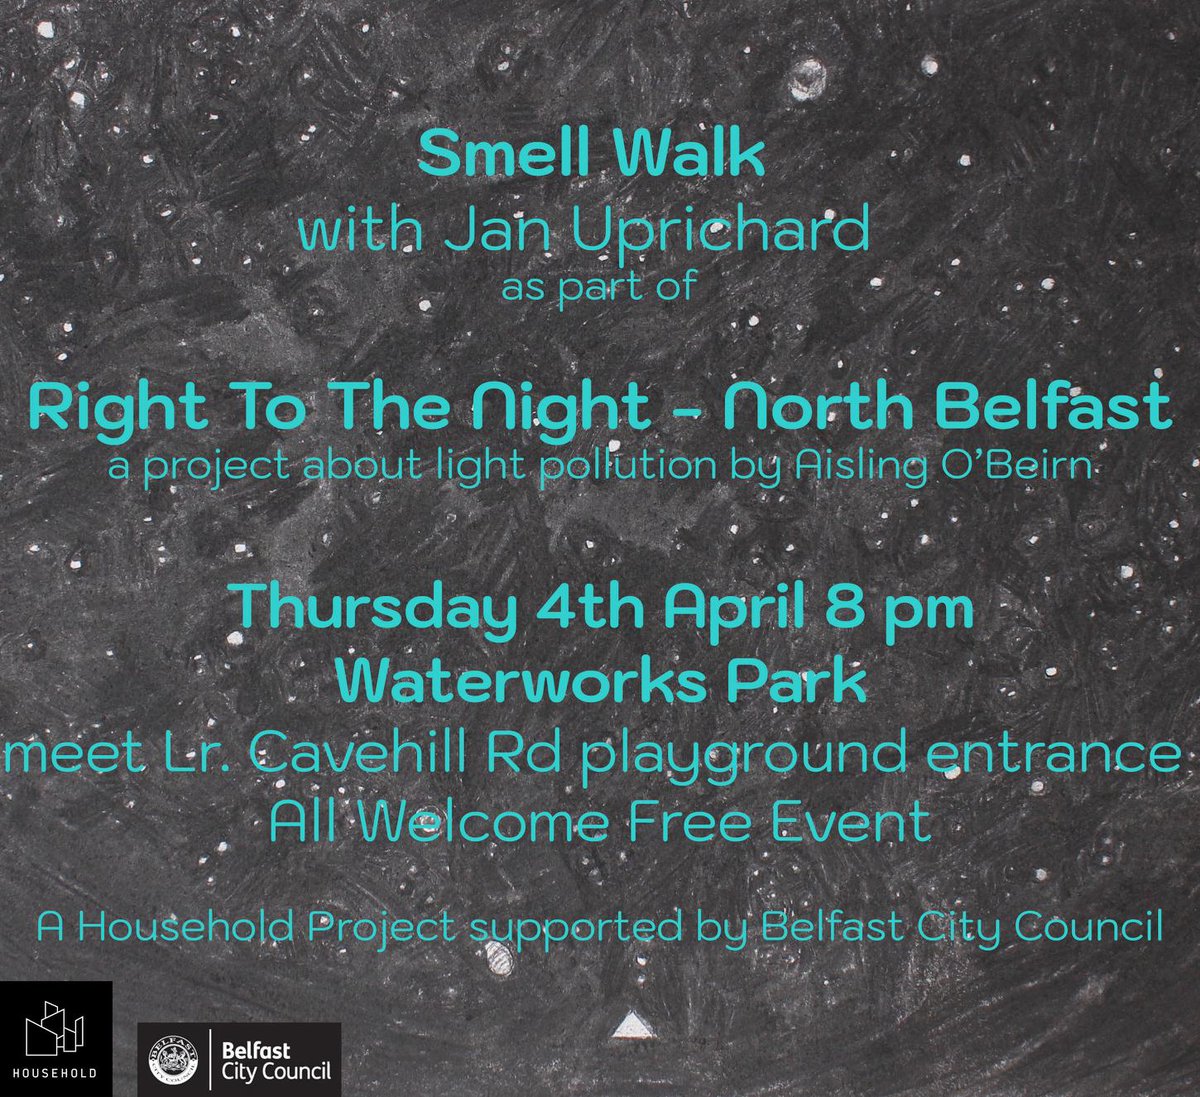 A couple of superb events coming up to take a poetic approach to enjoying our night skies!

@belfastcc #Belfast2024